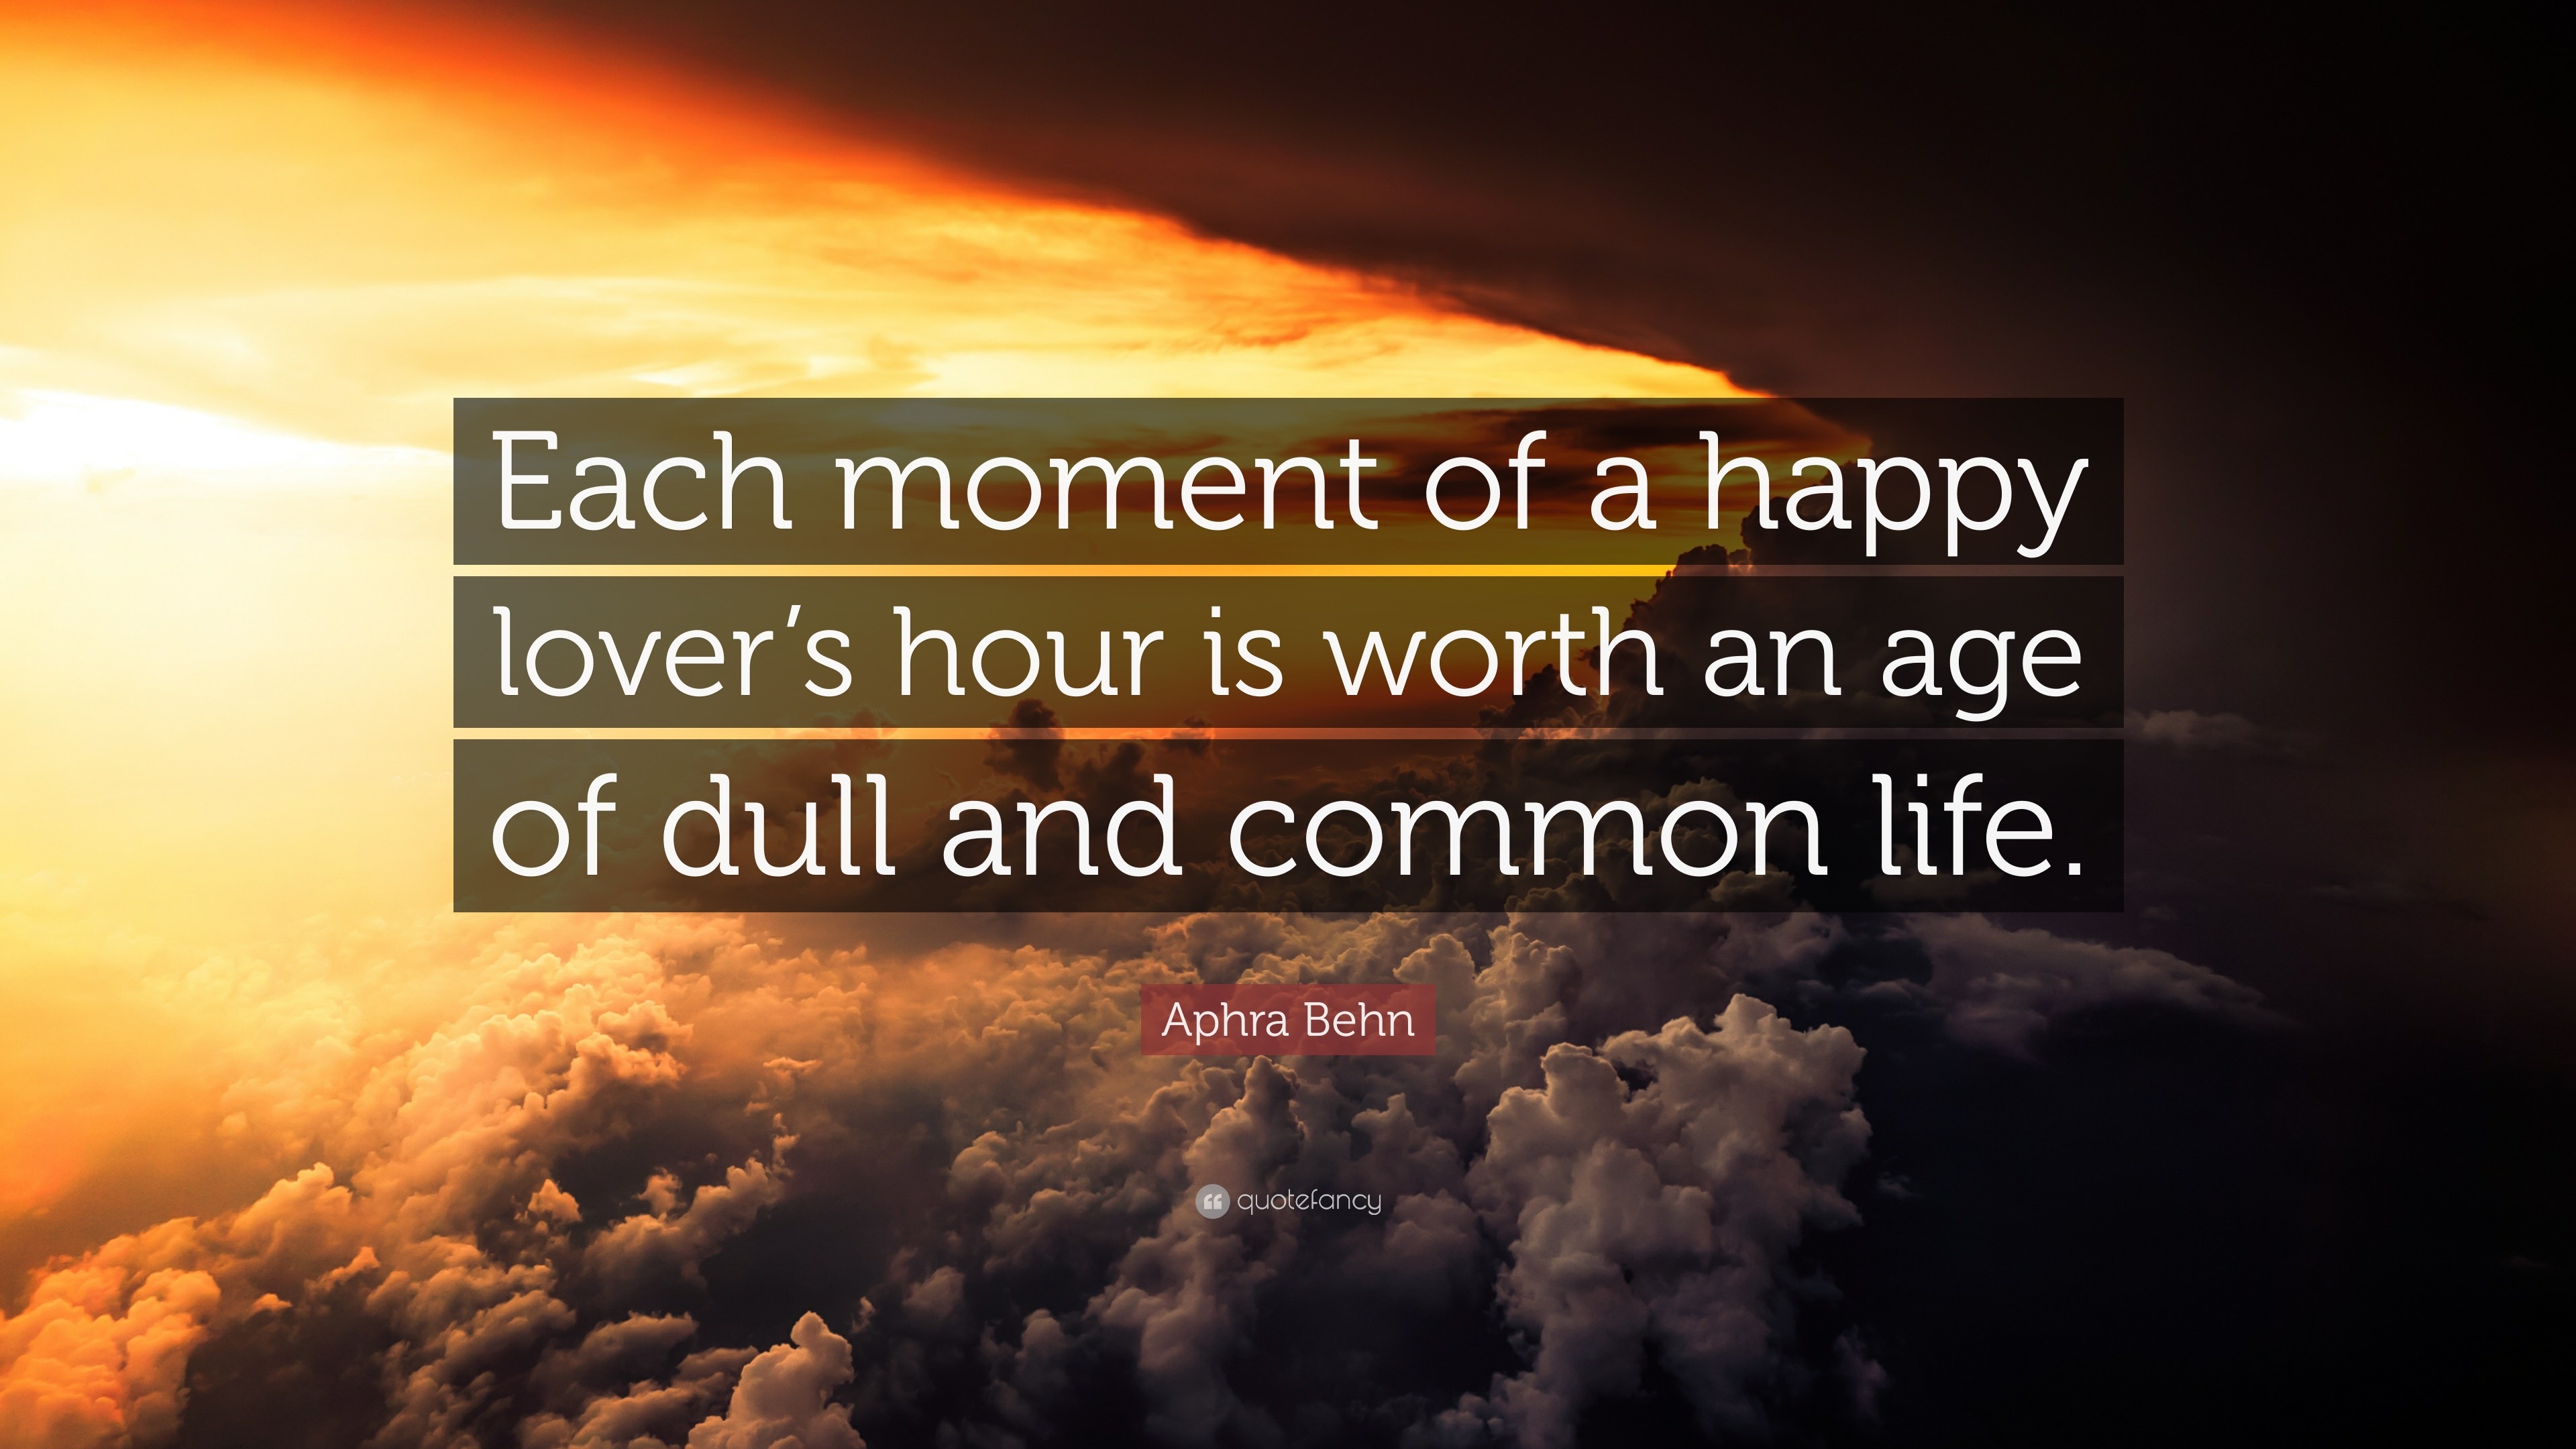 Aphra Behn Quote: “Each moment of a happy lover’s hour is worth an age ...